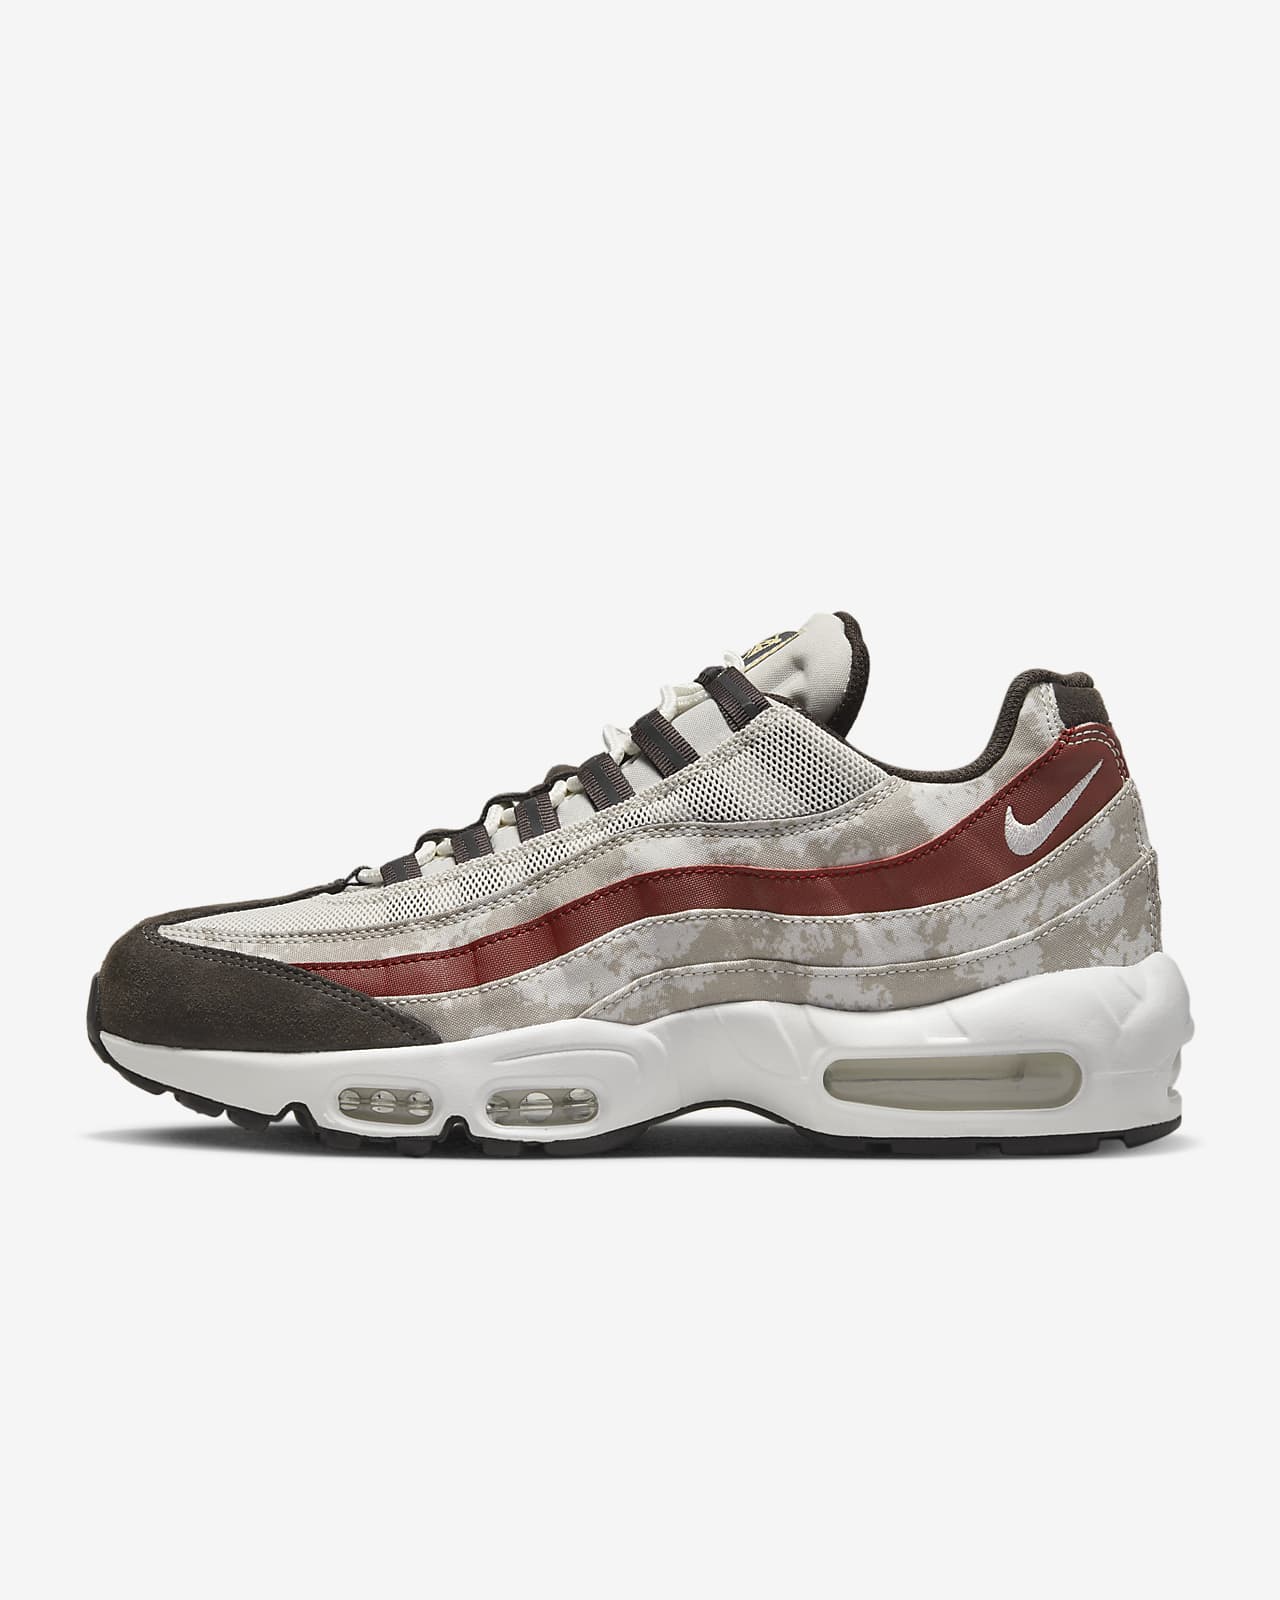 Monday hack Actively Nike Air Max 95 Men's Shoes. Nike.com